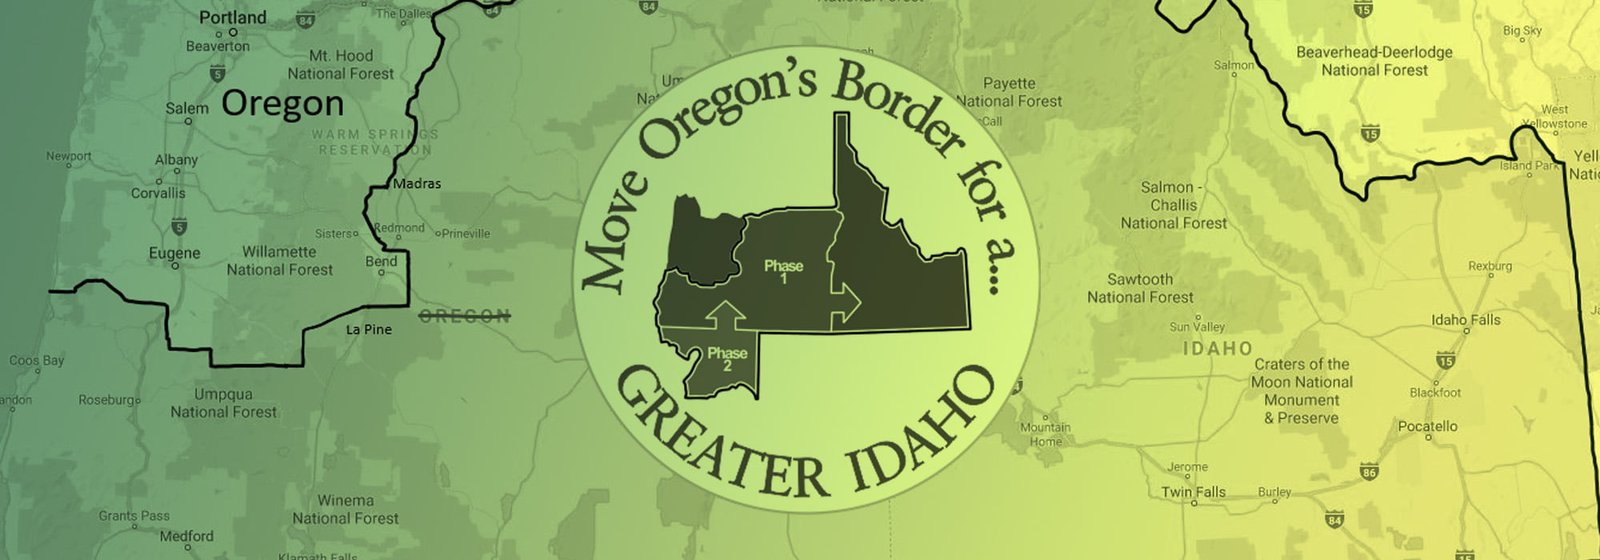 People’s Rights Oregon and State Secession Efforts